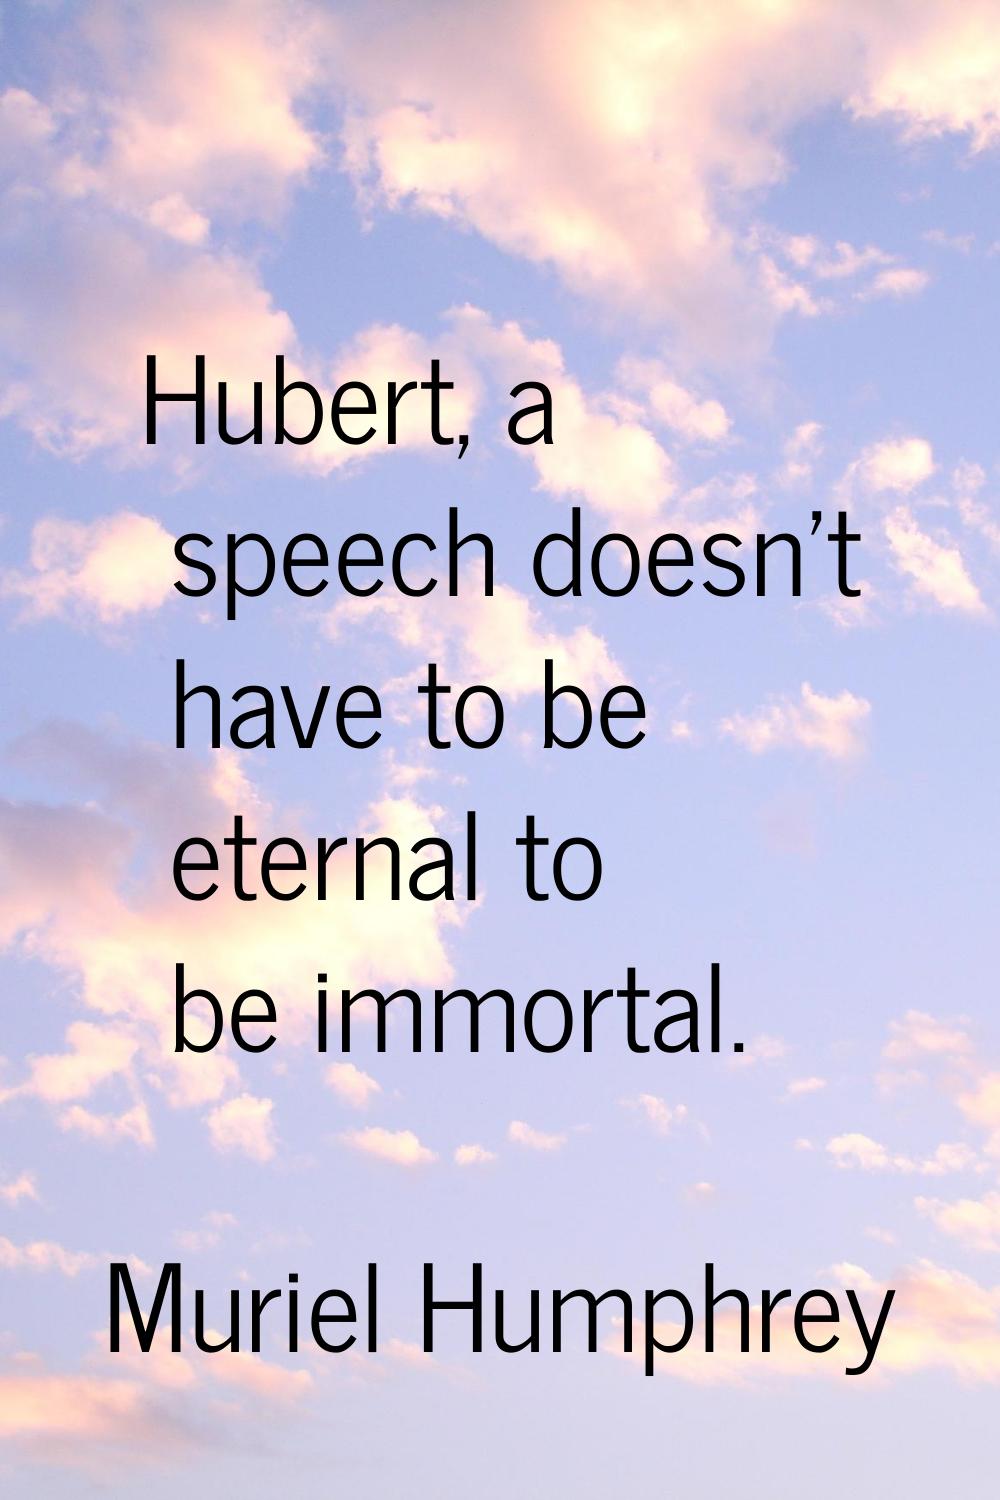 Hubert, a speech doesn't have to be eternal to be immortal.